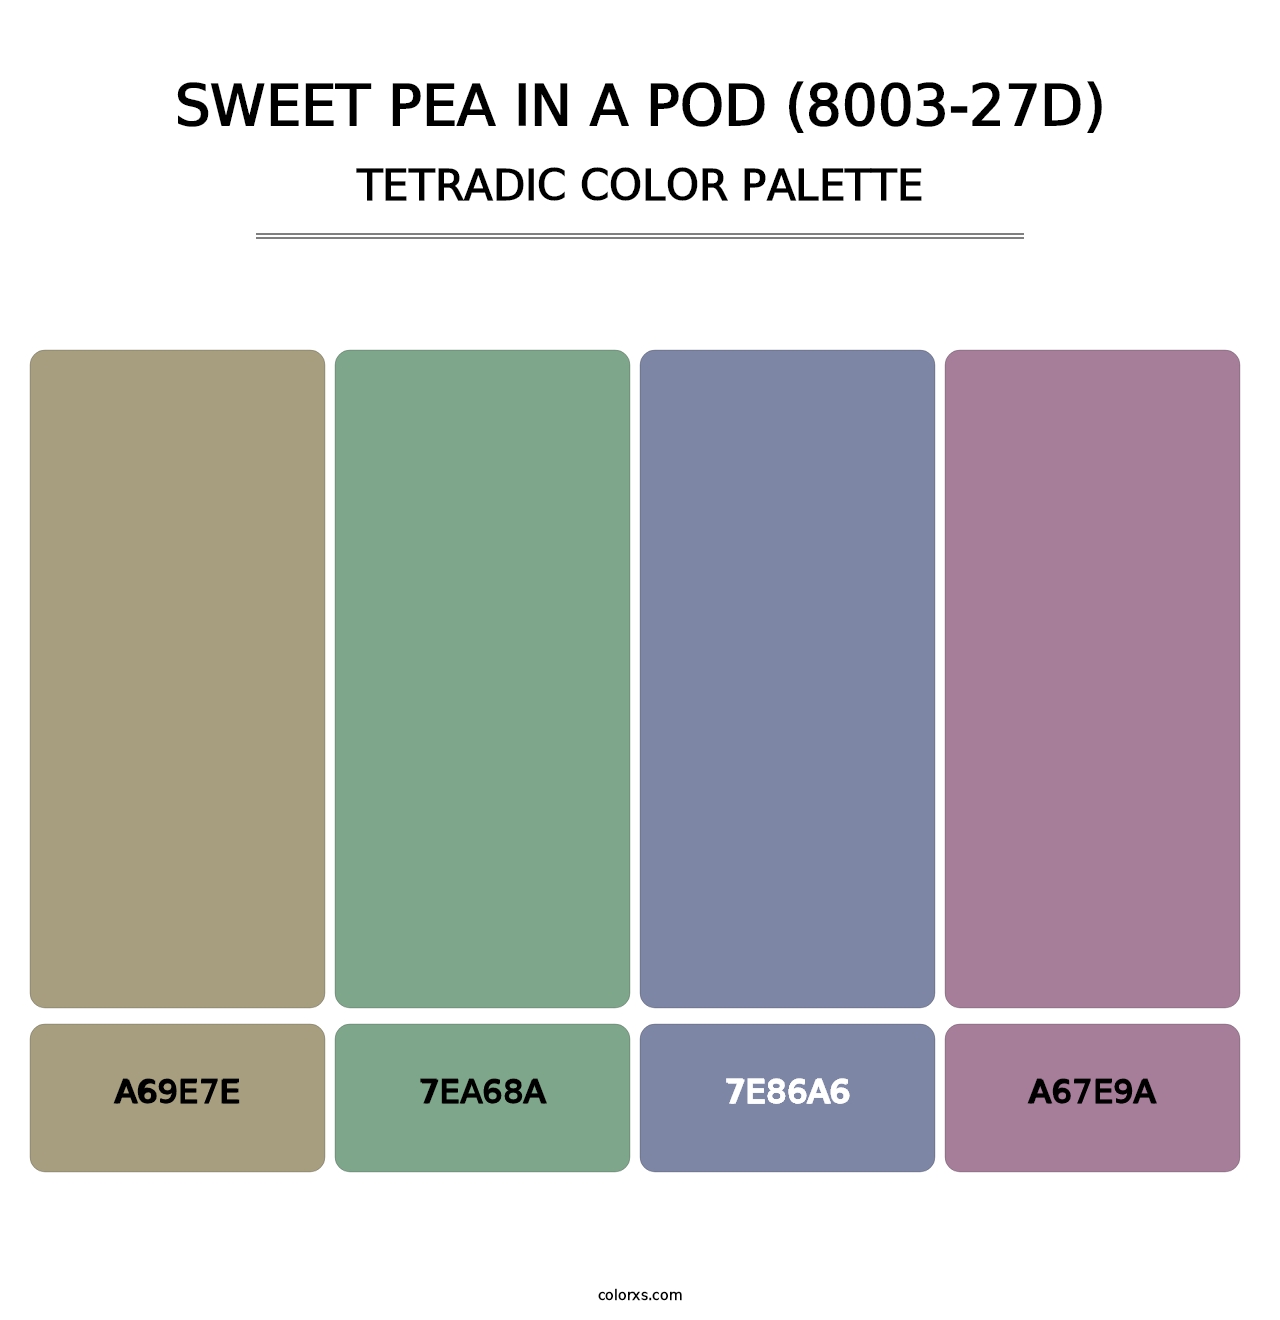 Sweet Pea in a Pod (8003-27D) - Tetradic Color Palette